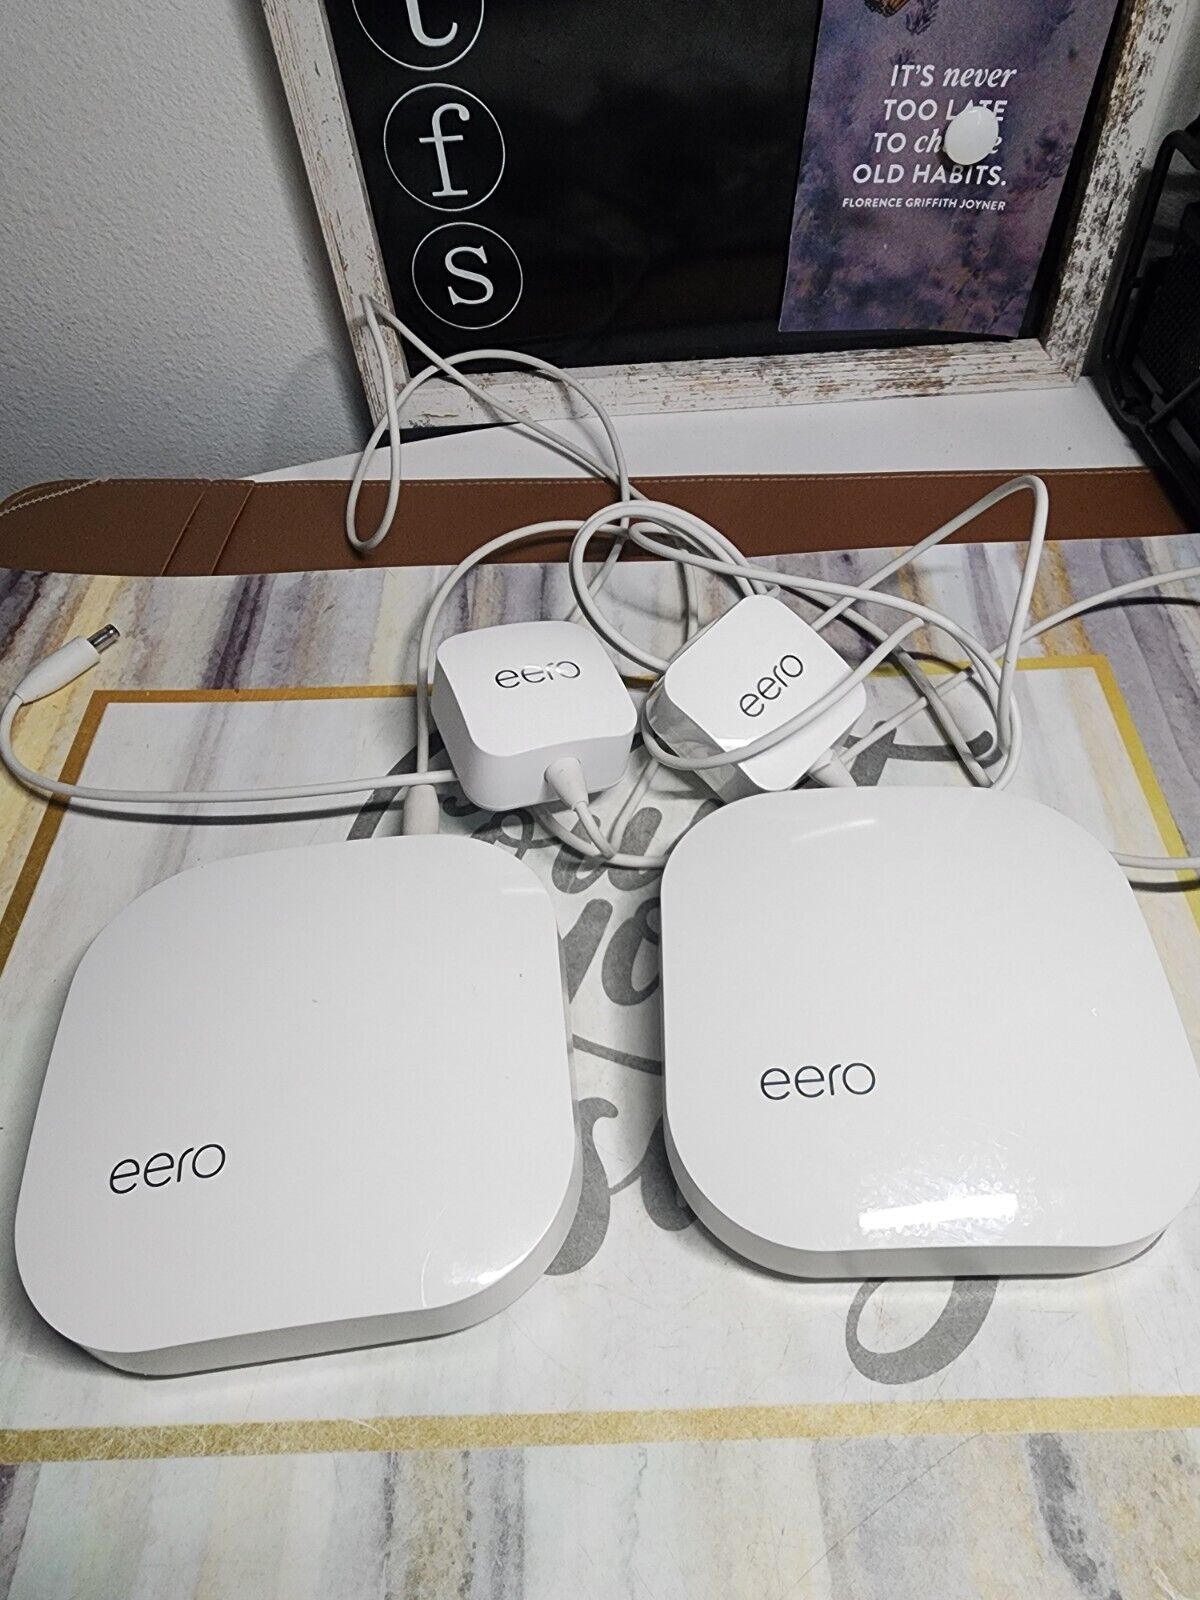 Eero A010001 1st Gen Mesh Network Dual-Band Wi-Fi Router